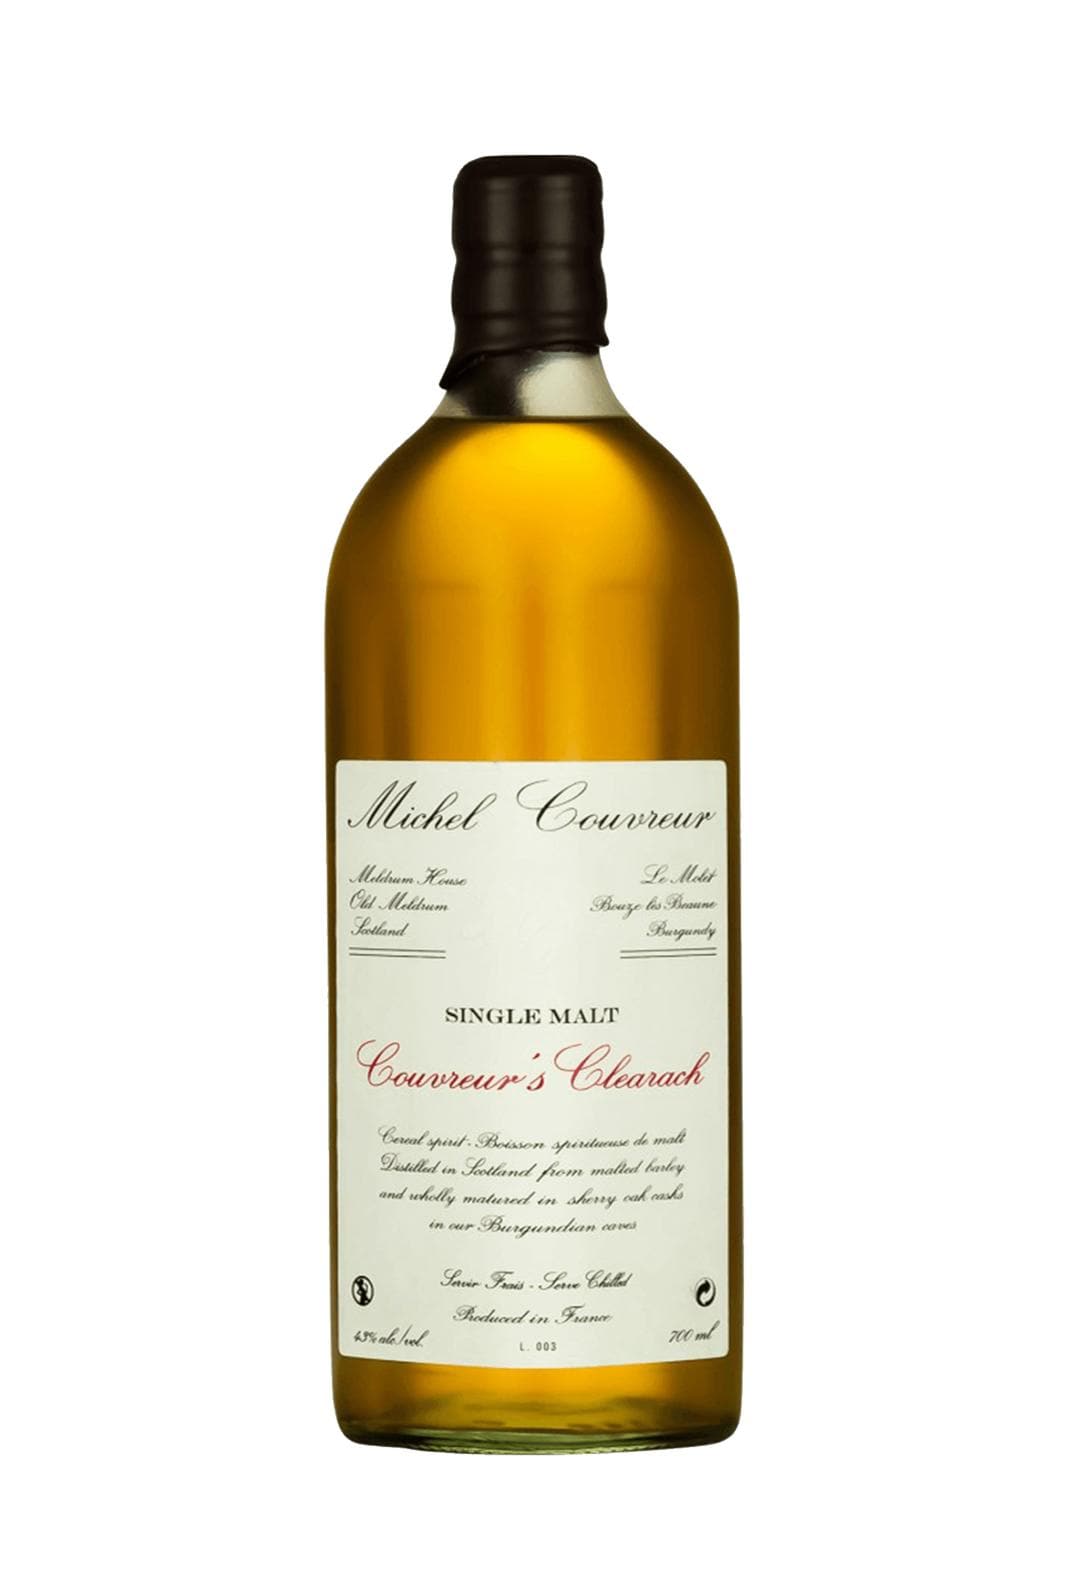 Michel Couvreur Whisky Clearach 43% 700ml | Whiskey | Shop online at Spirits of France